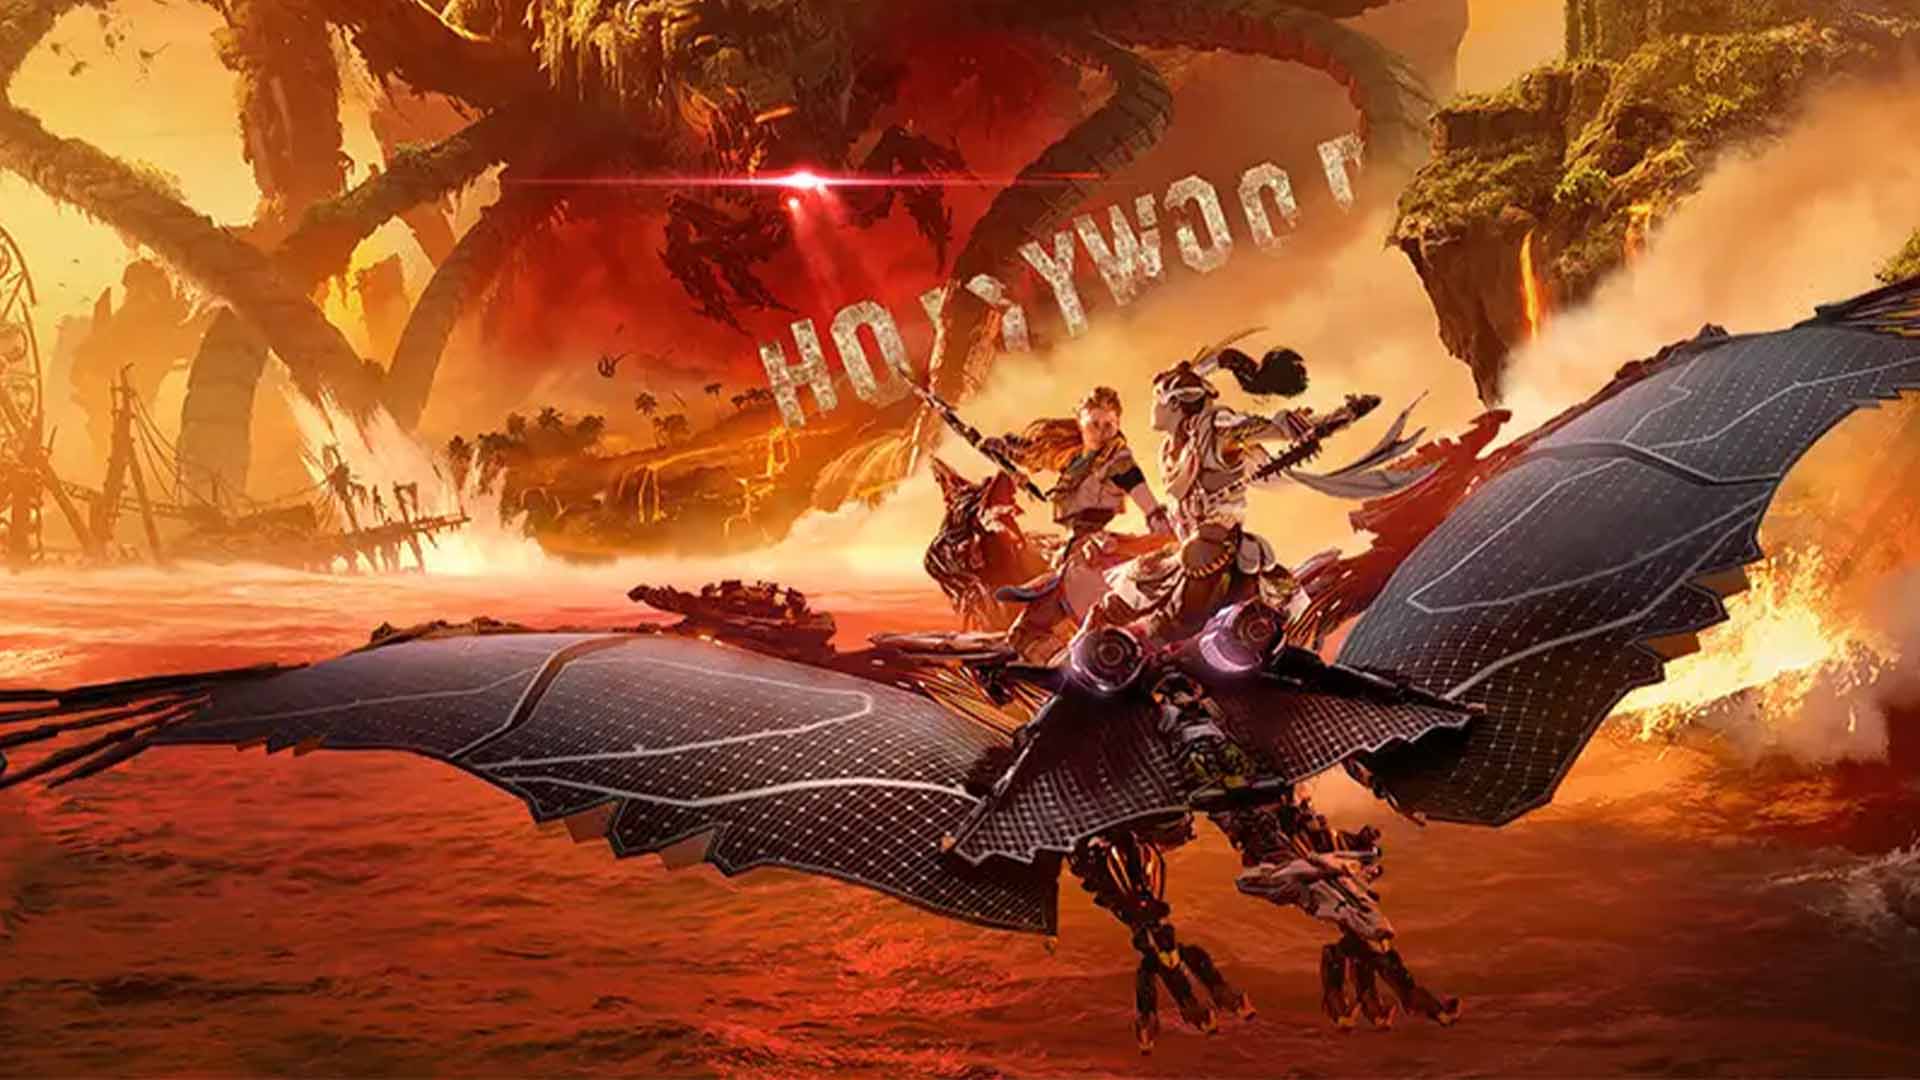 All the Horizon Forbidden West Burning Shores new machines